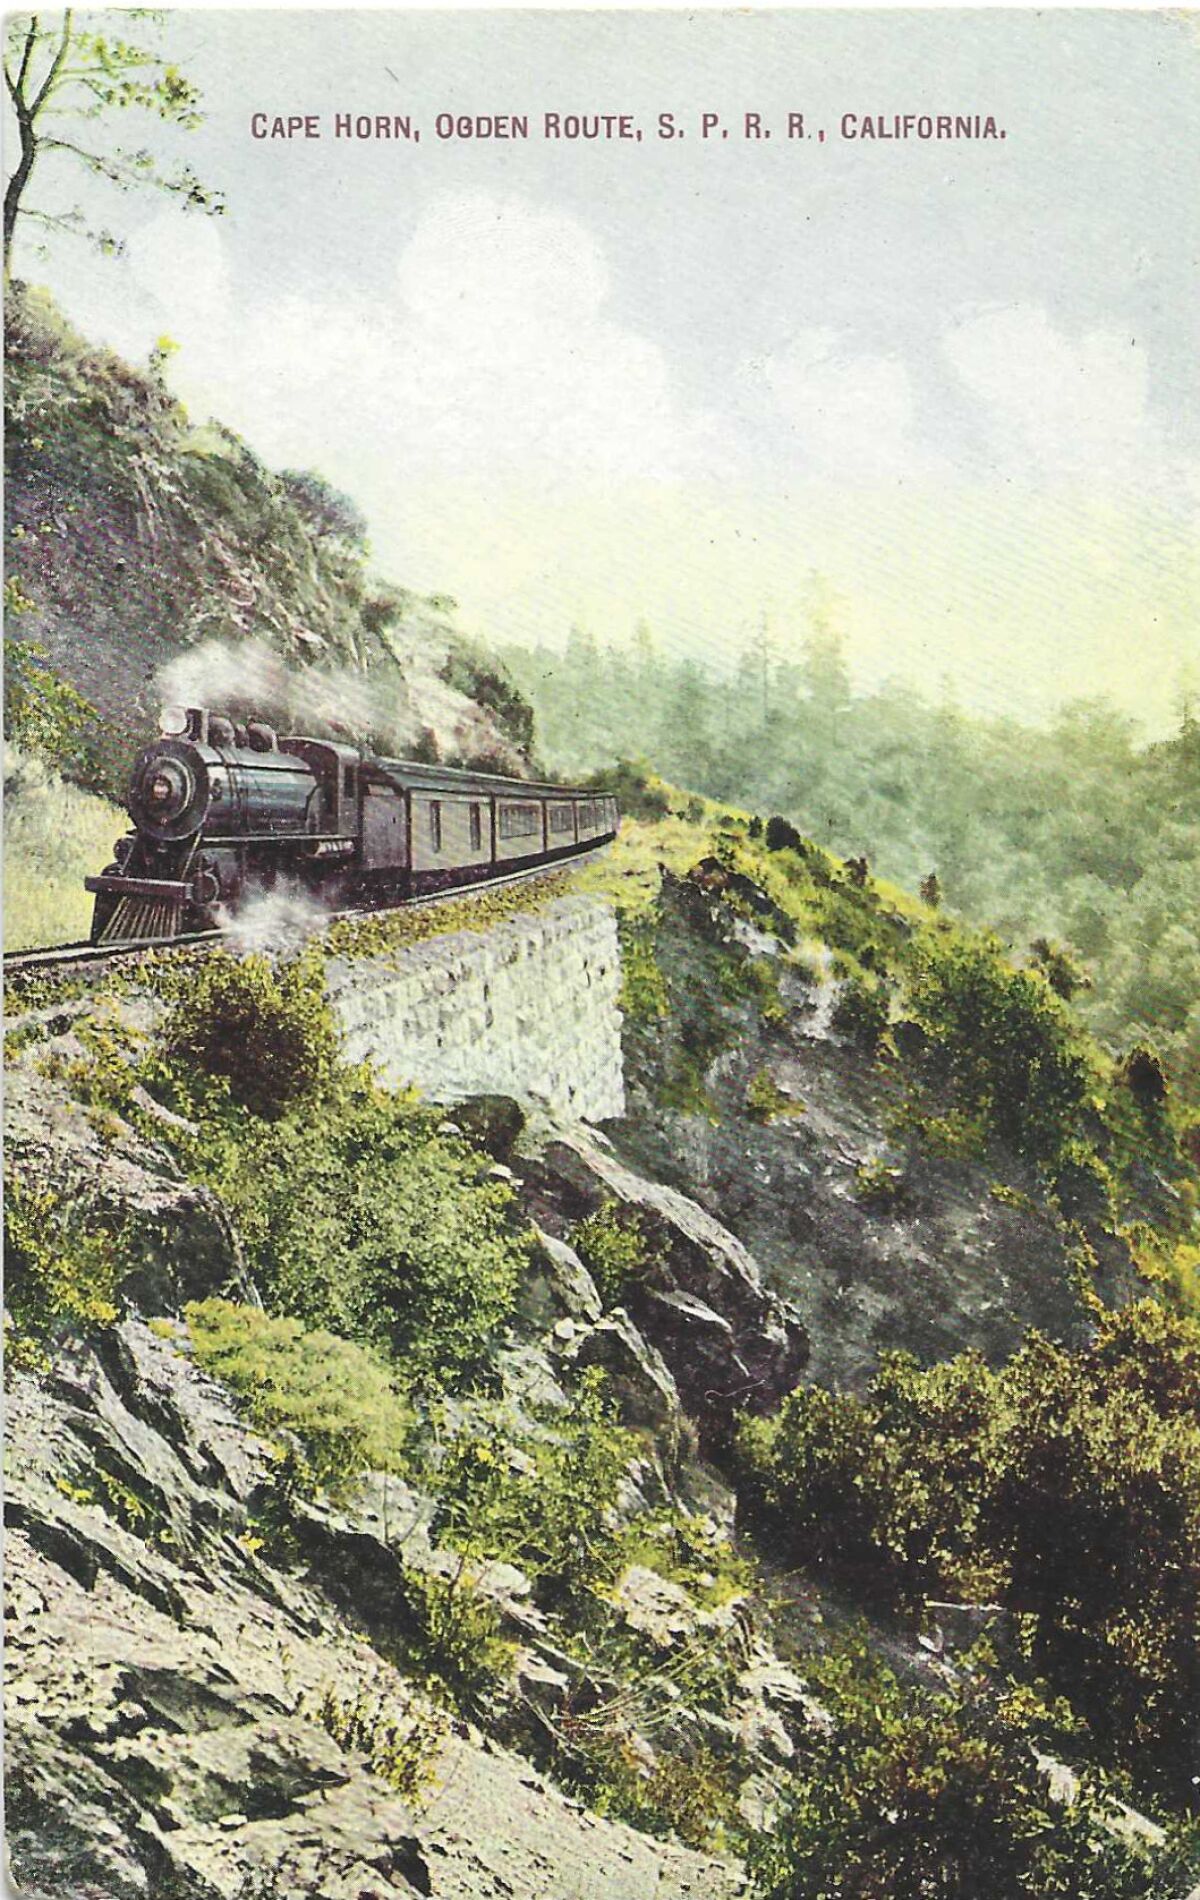 A locomotive on a mountain pass is depicted on a vintage postcard